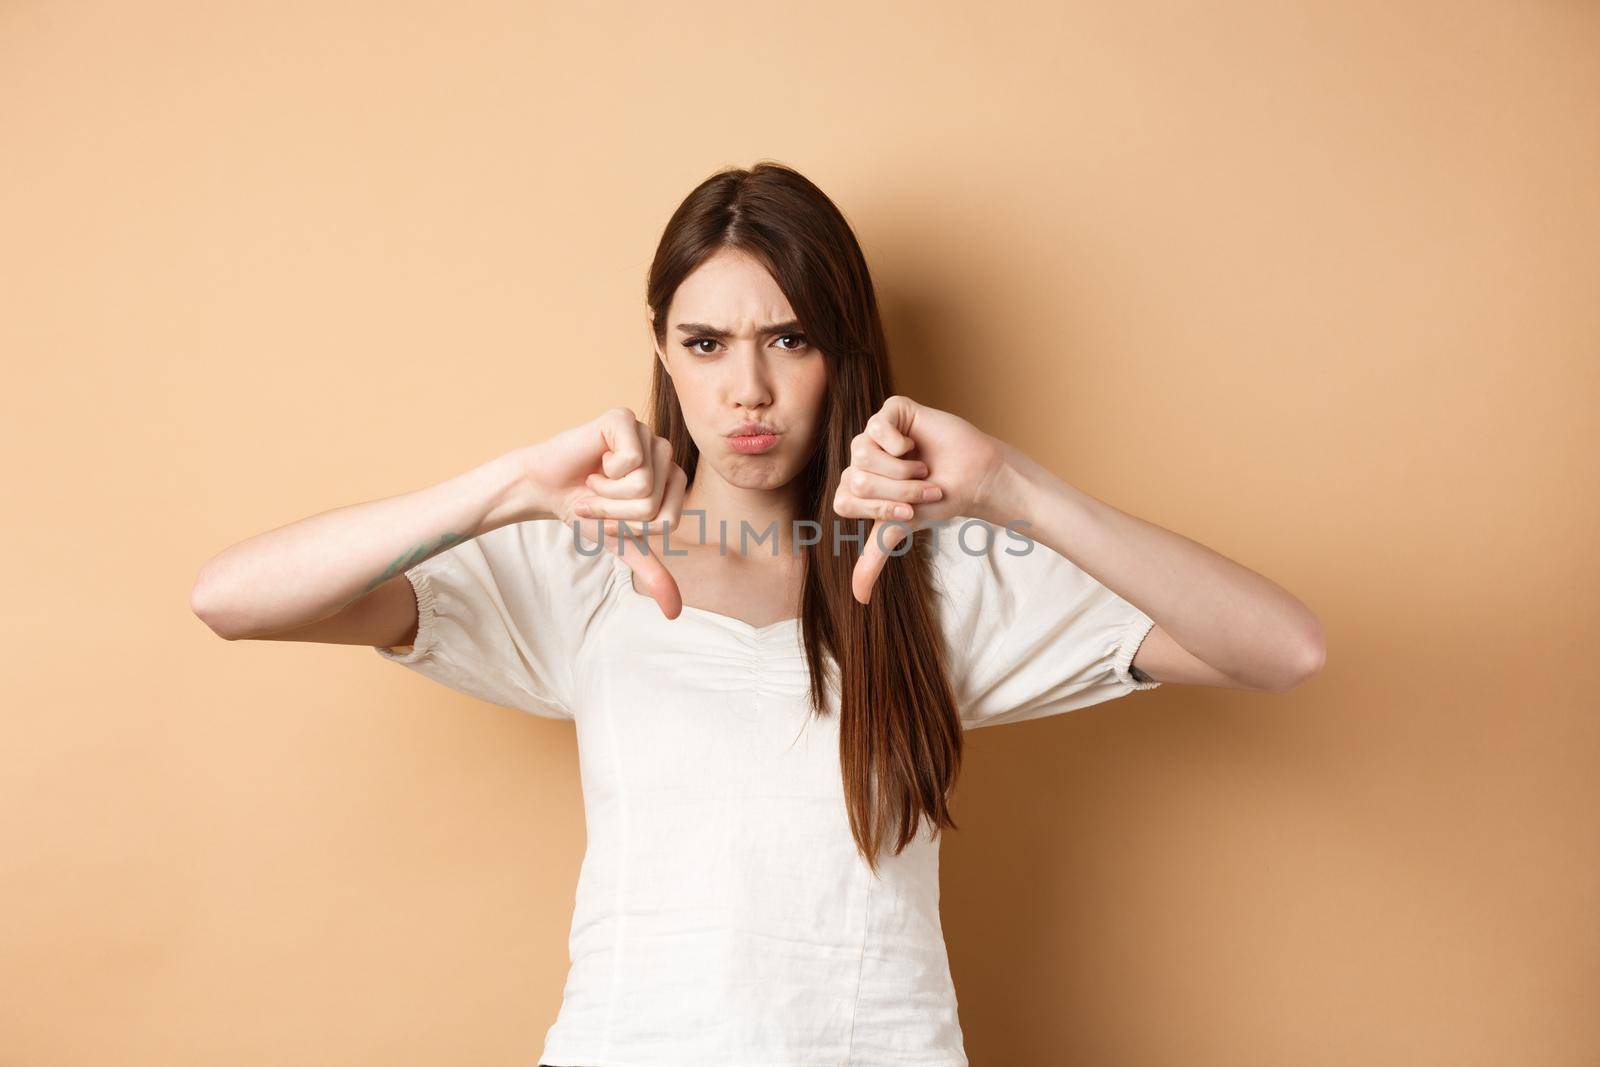 Absolutely no. Disappointed young woman frowning and showing thumbs down, express dislike and negative emotions, bad feedback, standing on beige background.